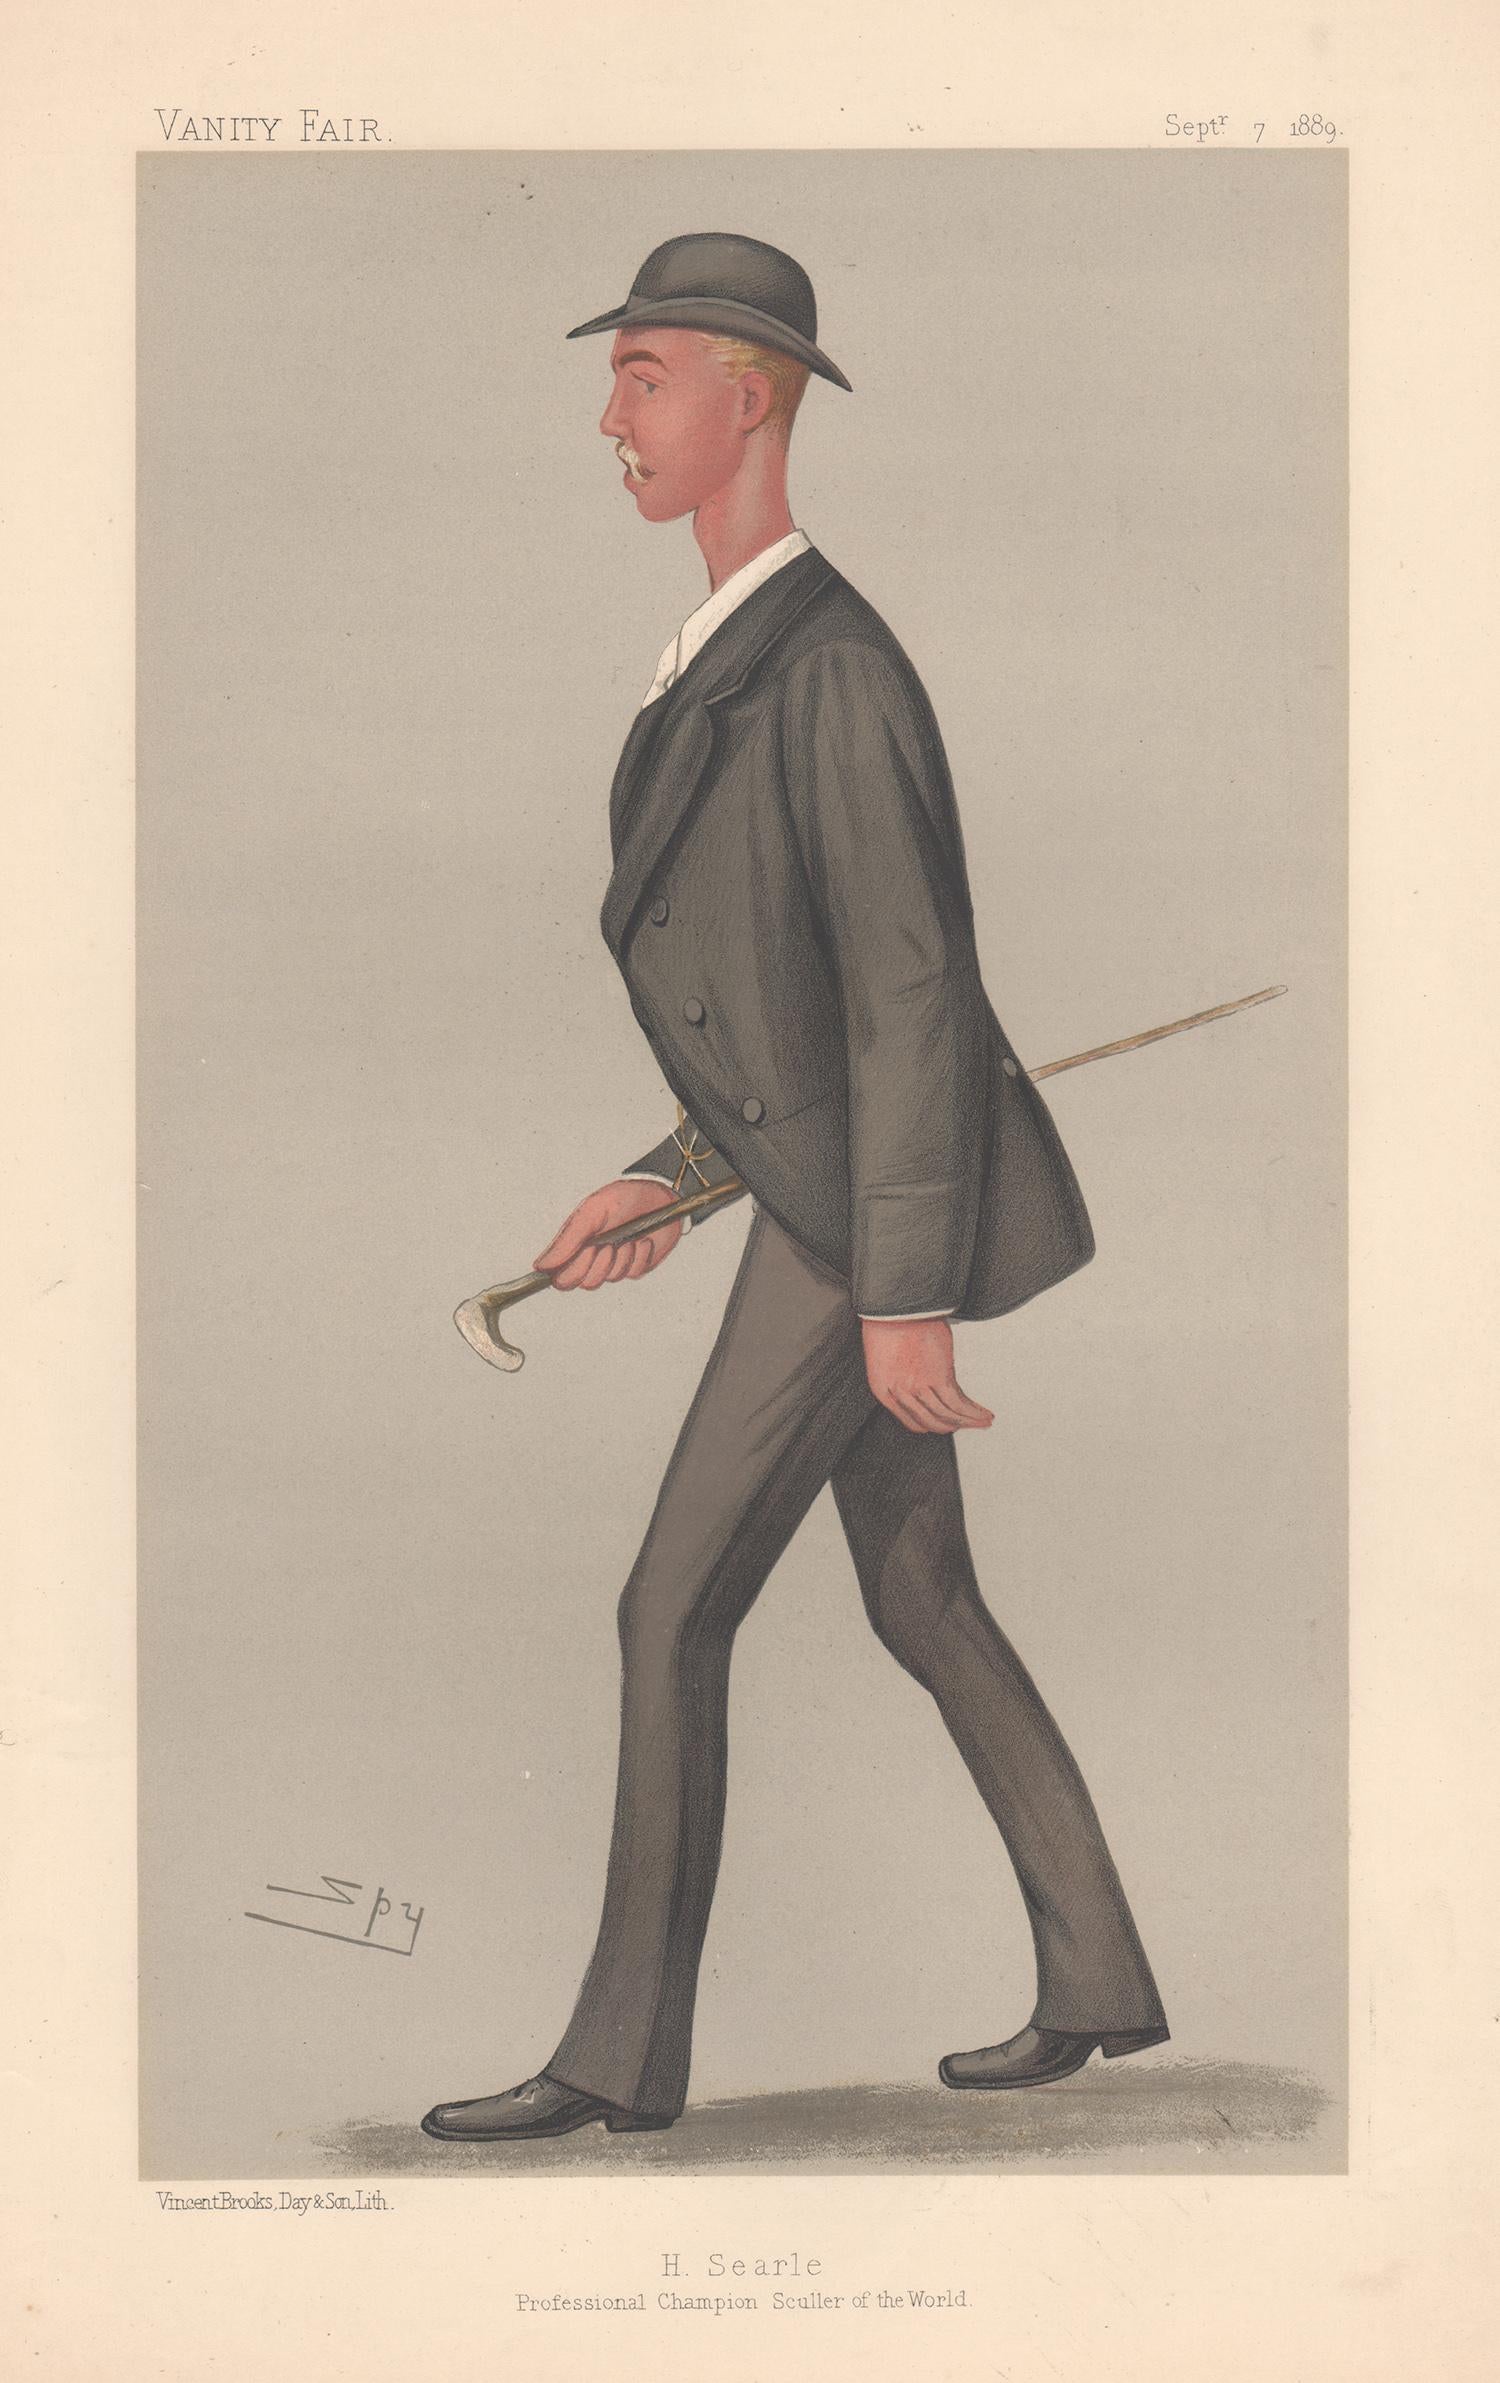 Henry Searle, rower, Vanity Fair rowing portrait chromolithograph, 1889